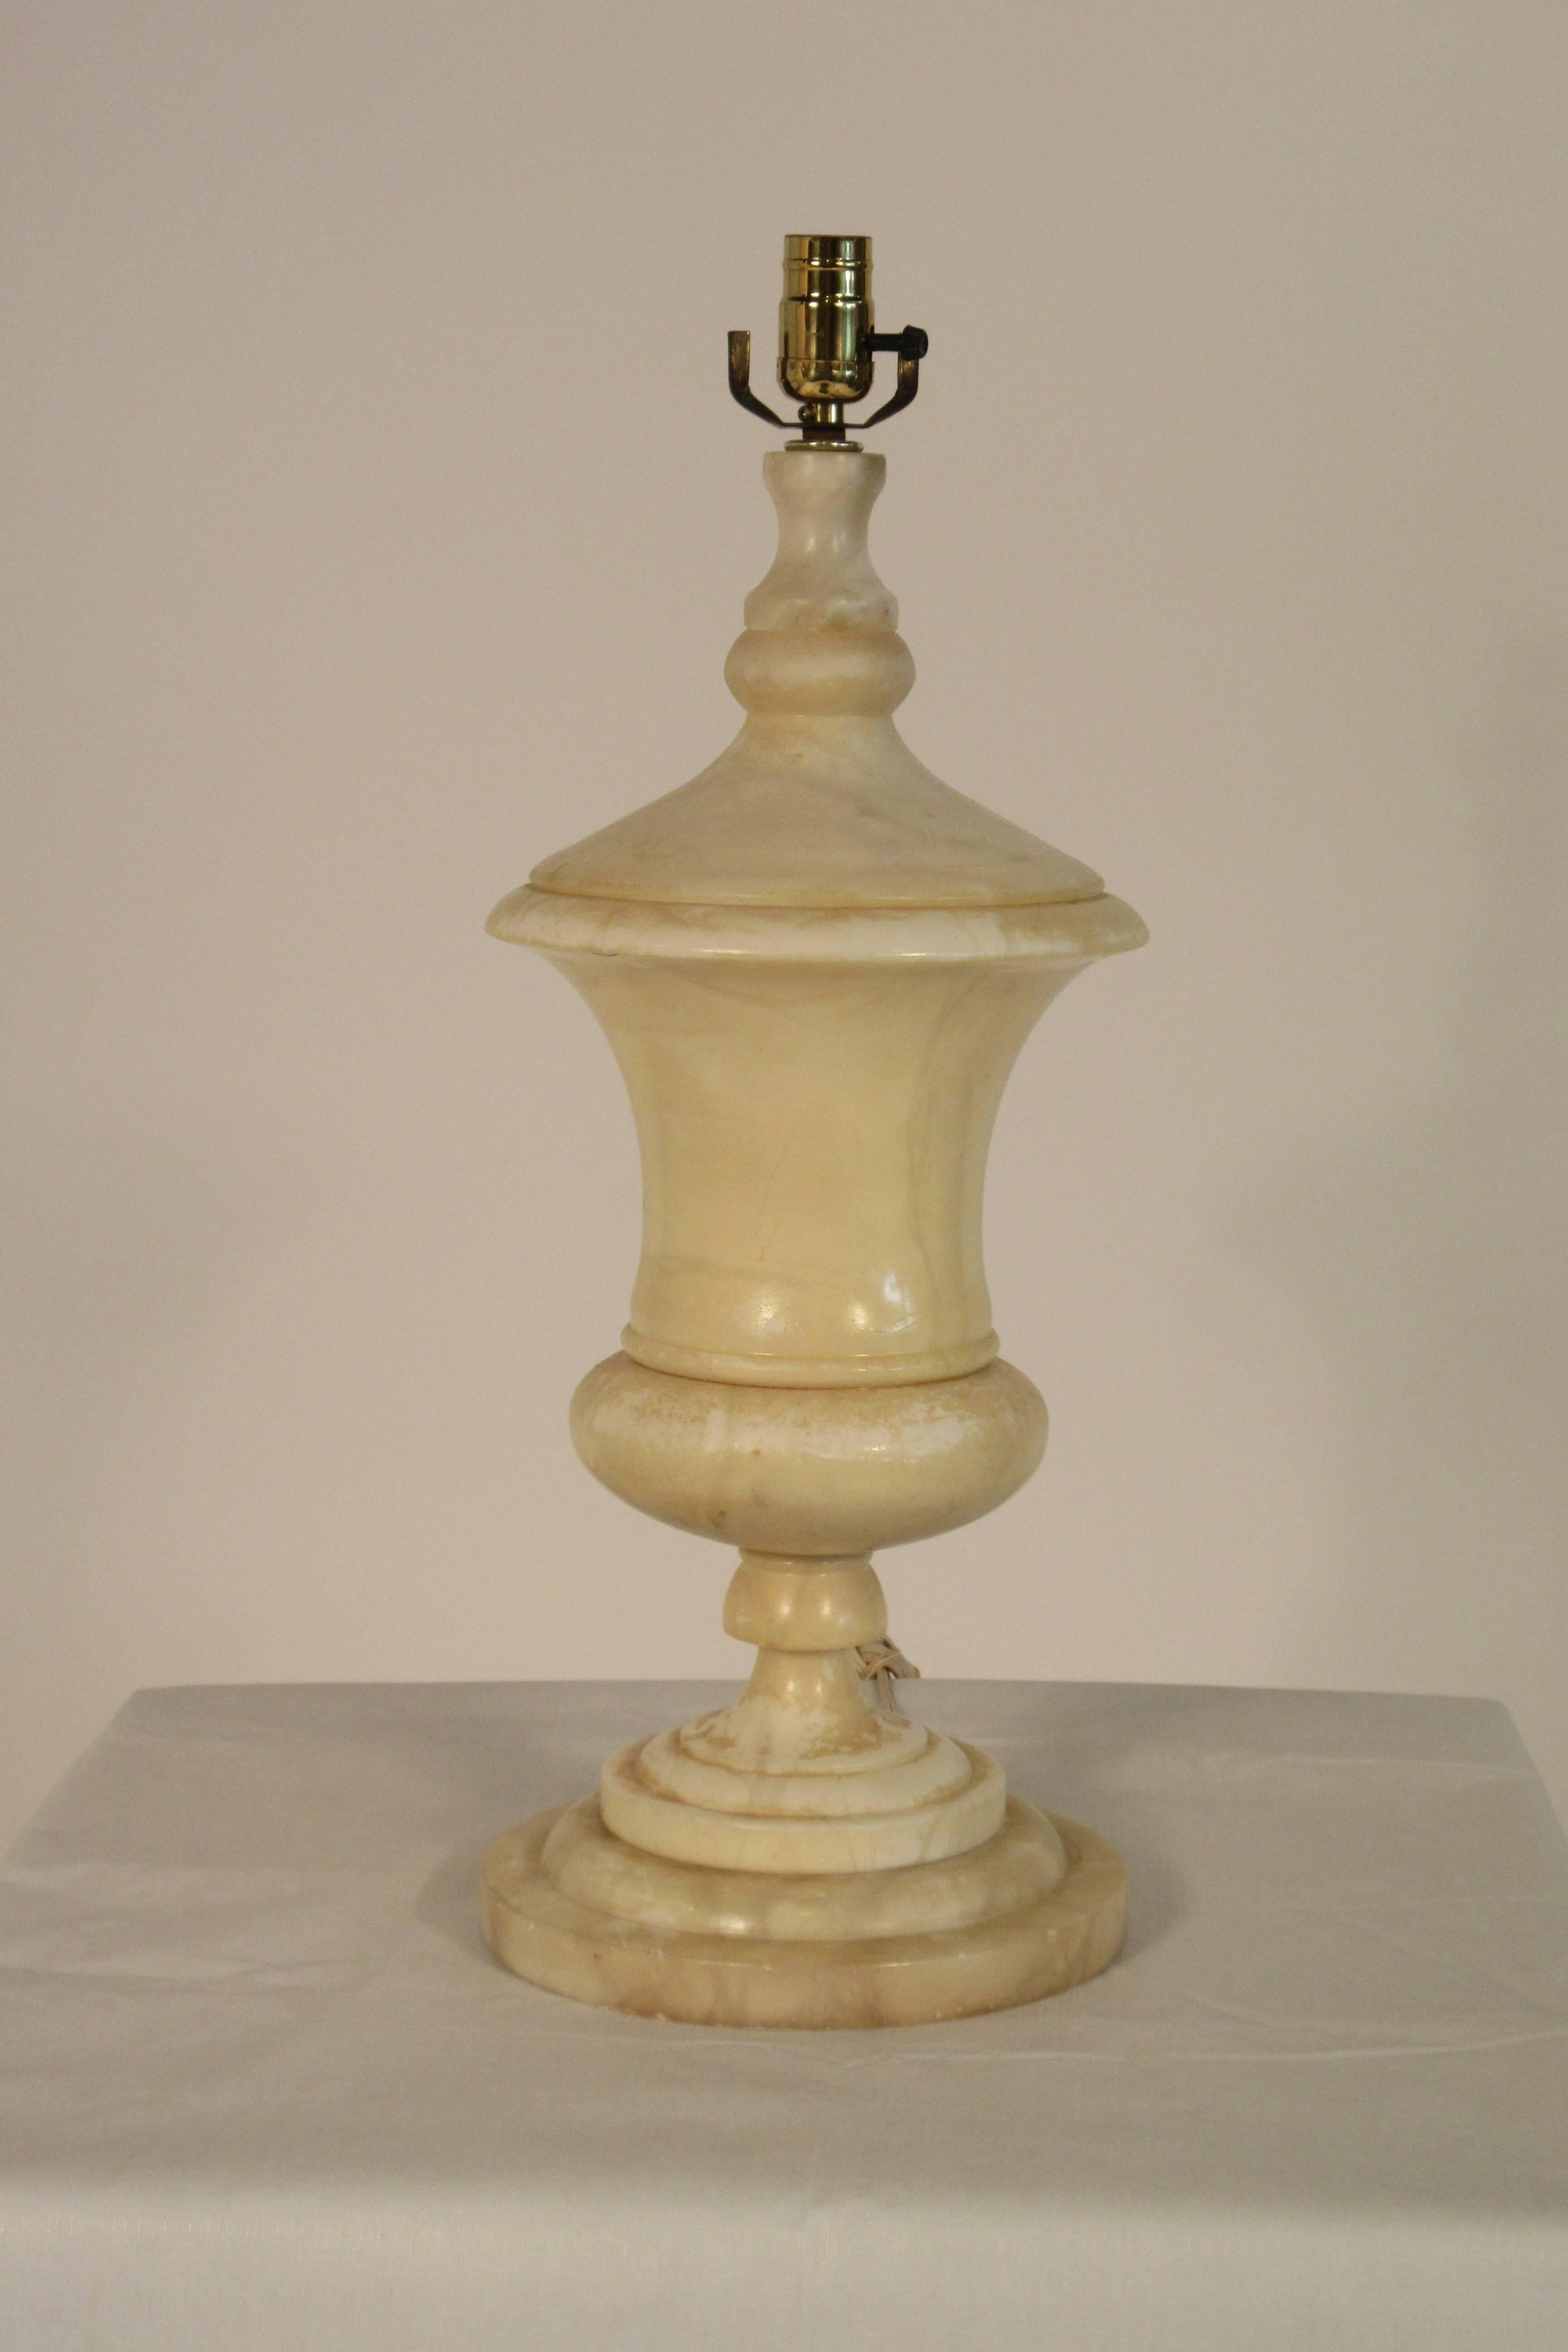 1940s marble urn table lamp.